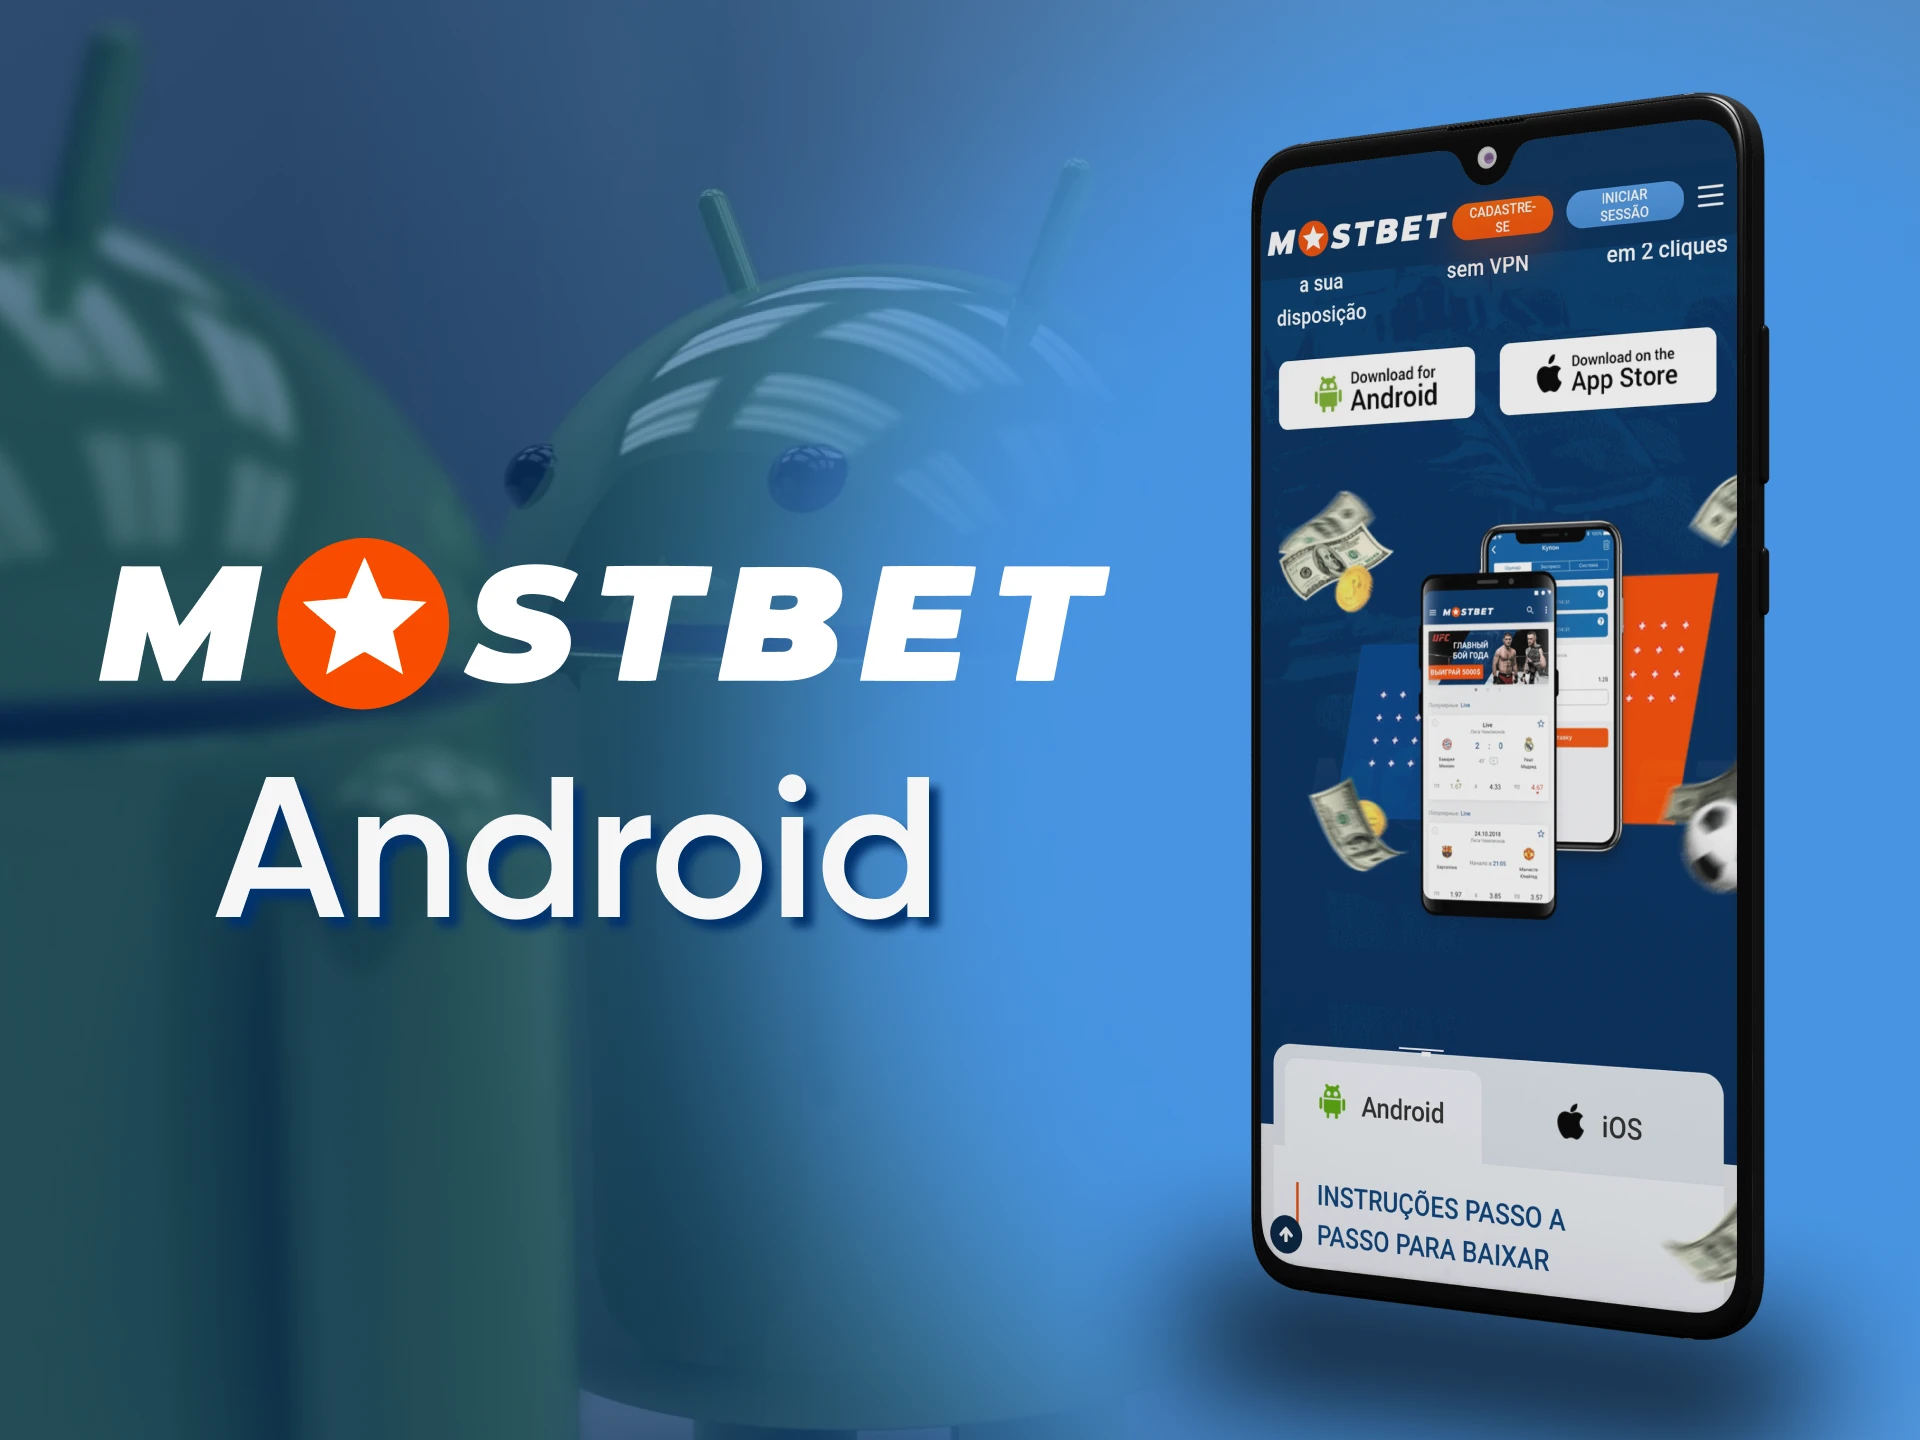 To start betting on your Android device, download the app.